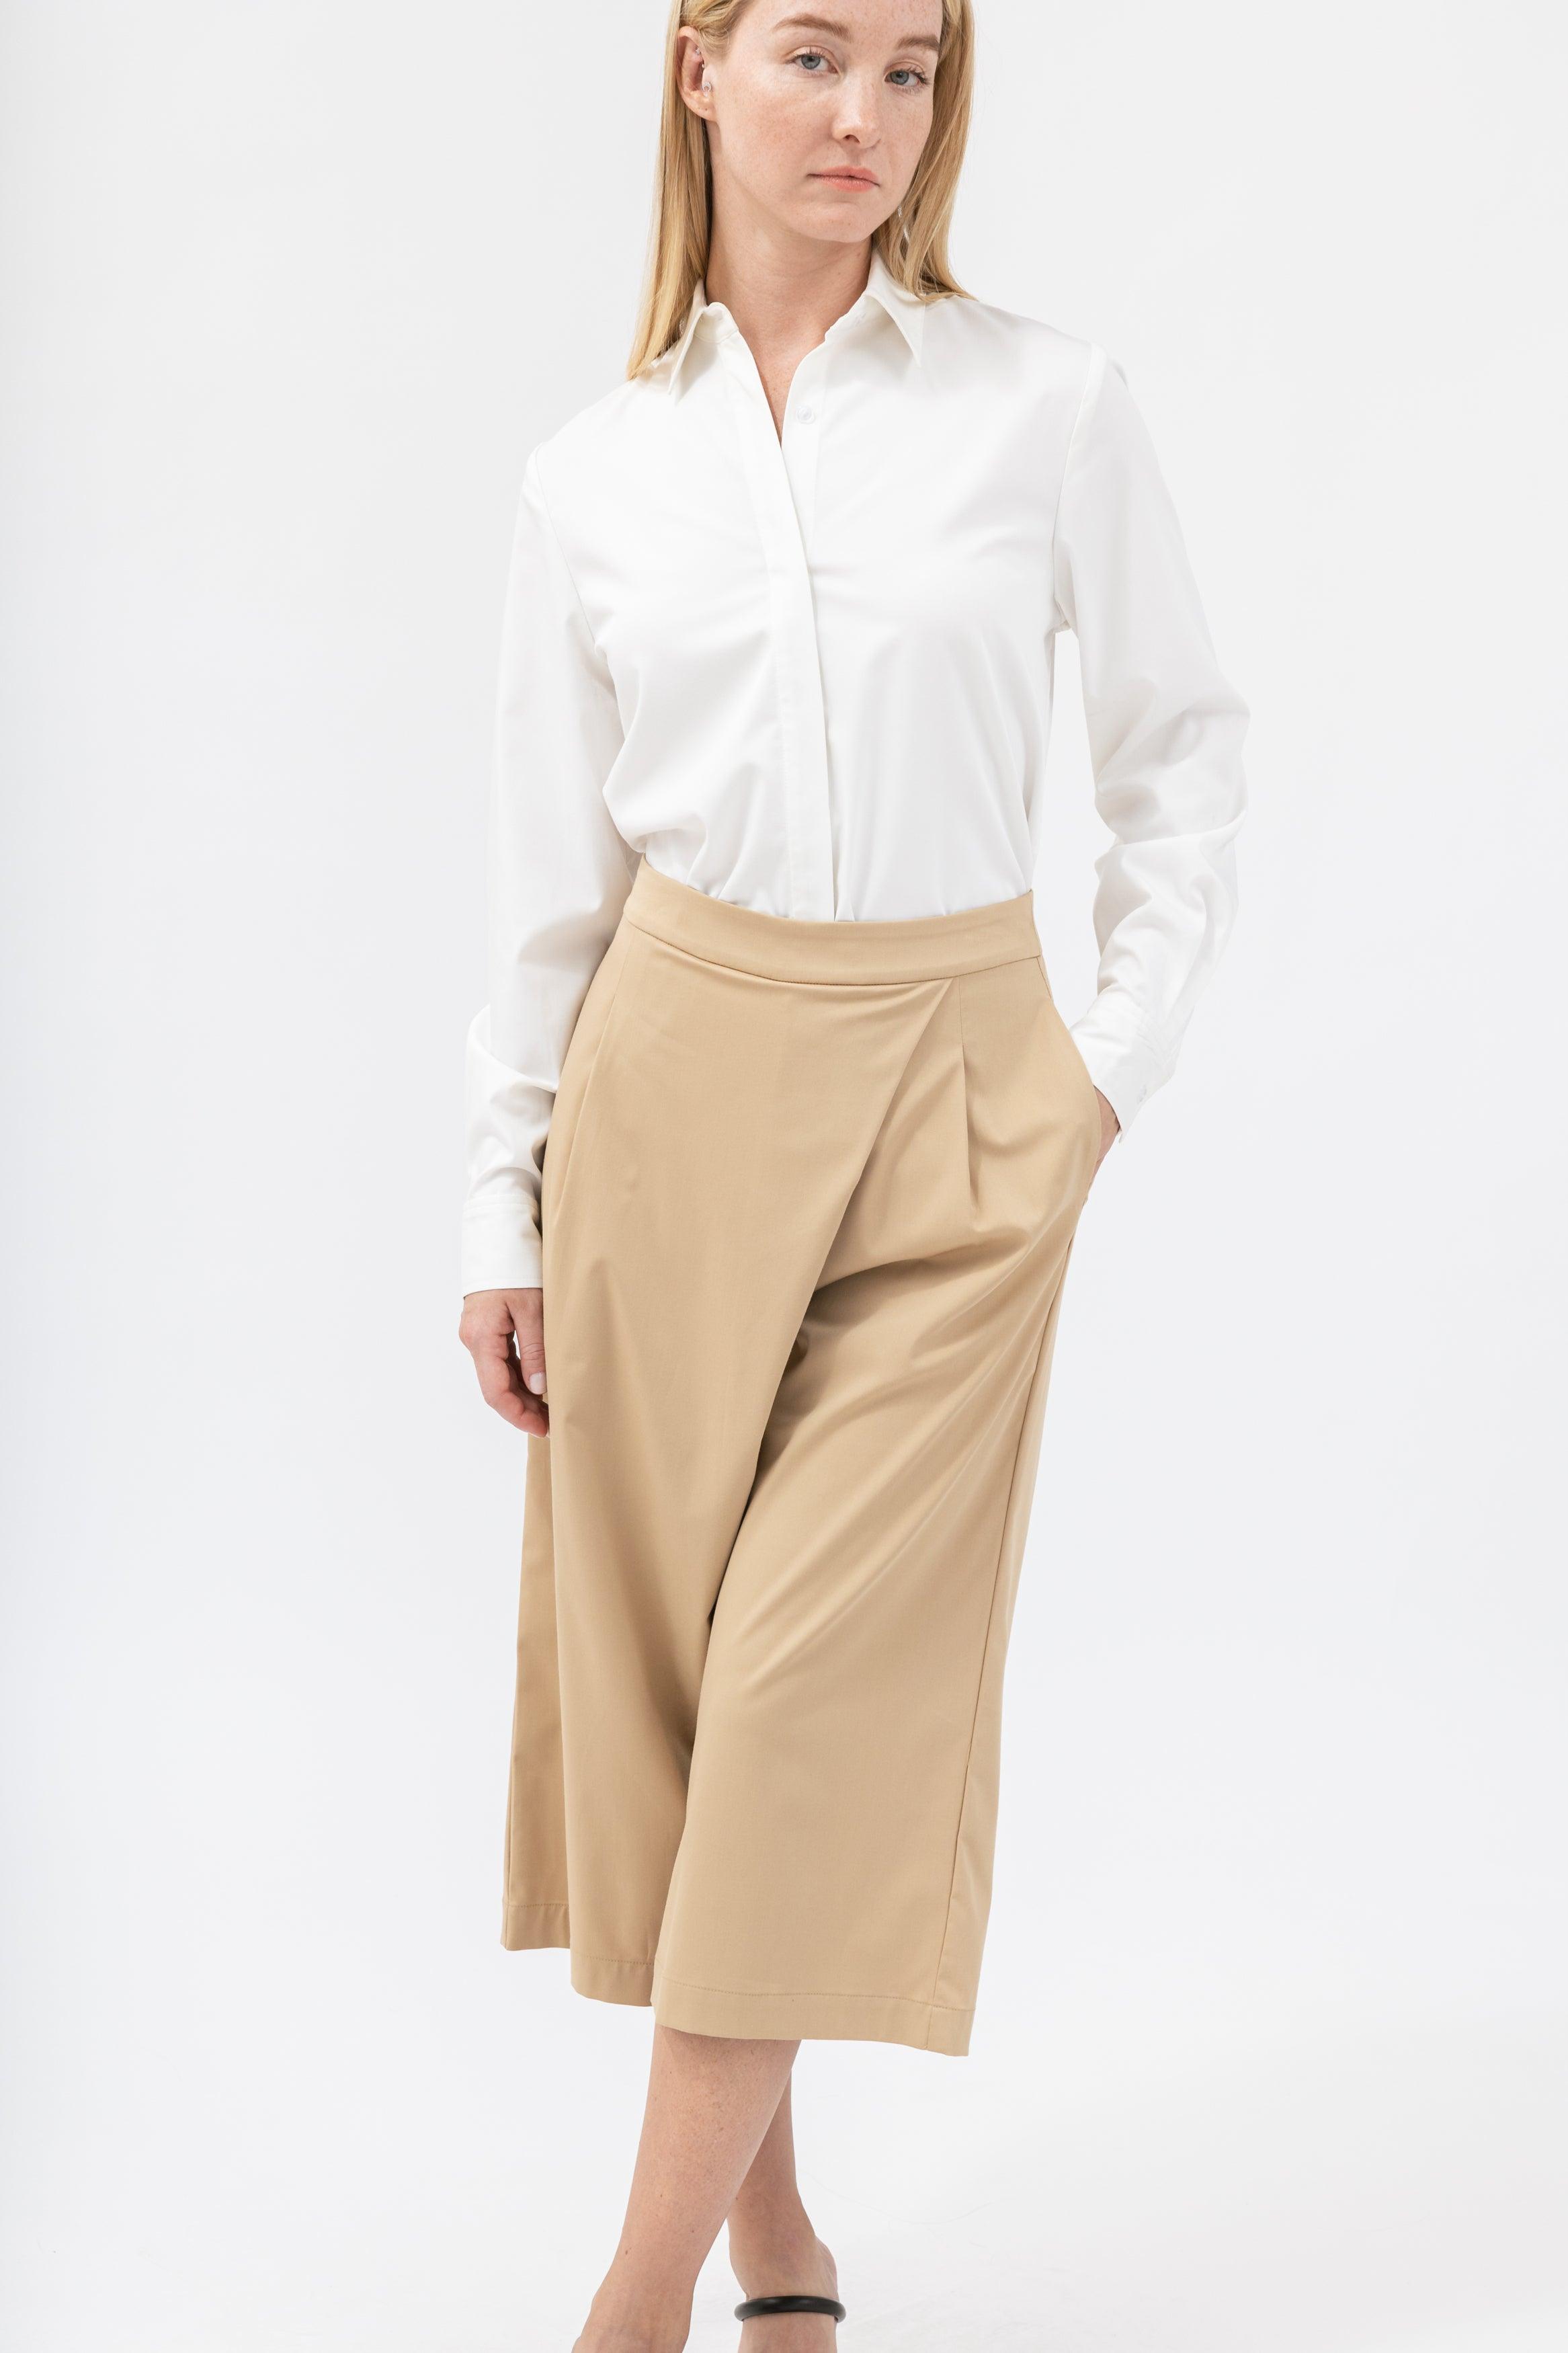 Women's Pleated Wide Cropped Pants - NOT LABELED